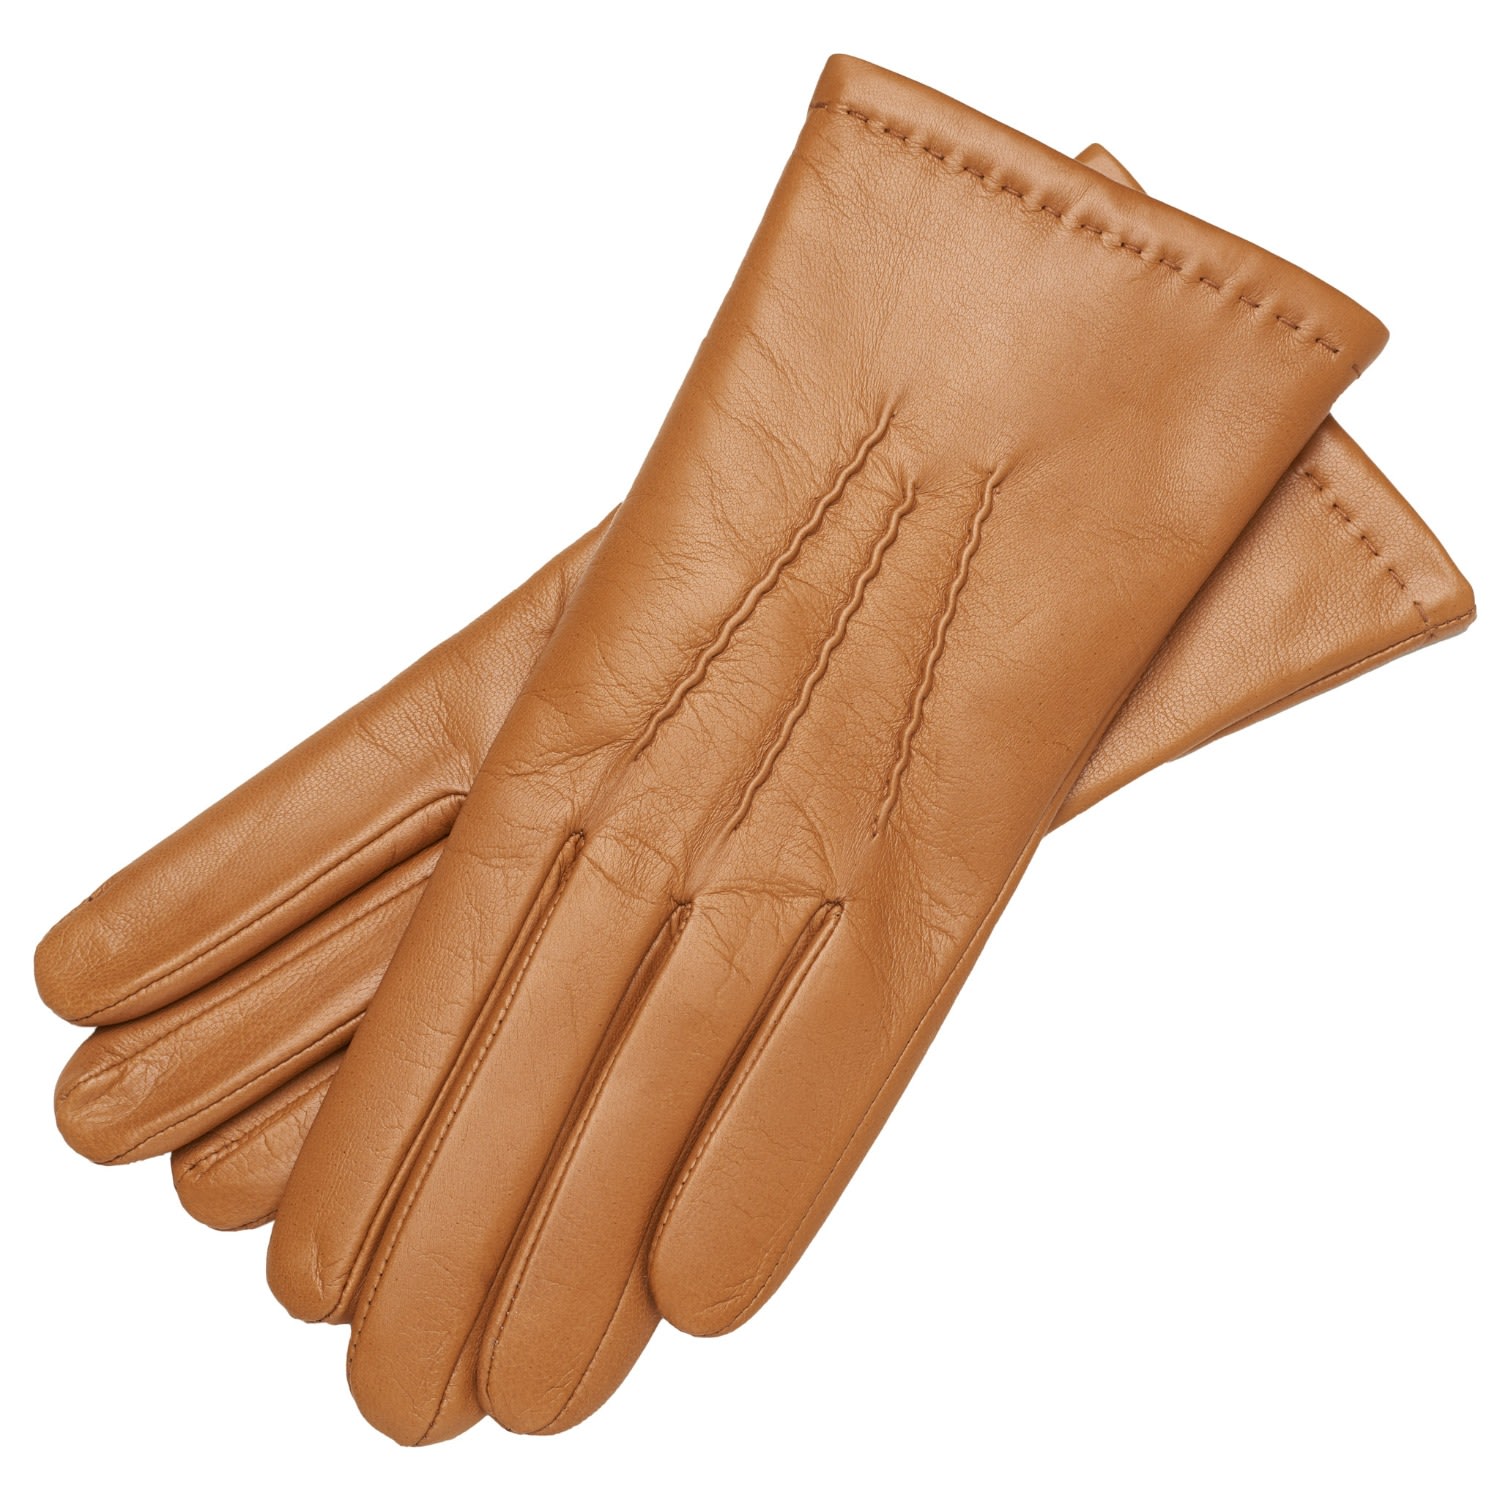 1861 Glove Manufactory Brown Cremona - Women's Handmade Gloves In Camel Nappa Leather